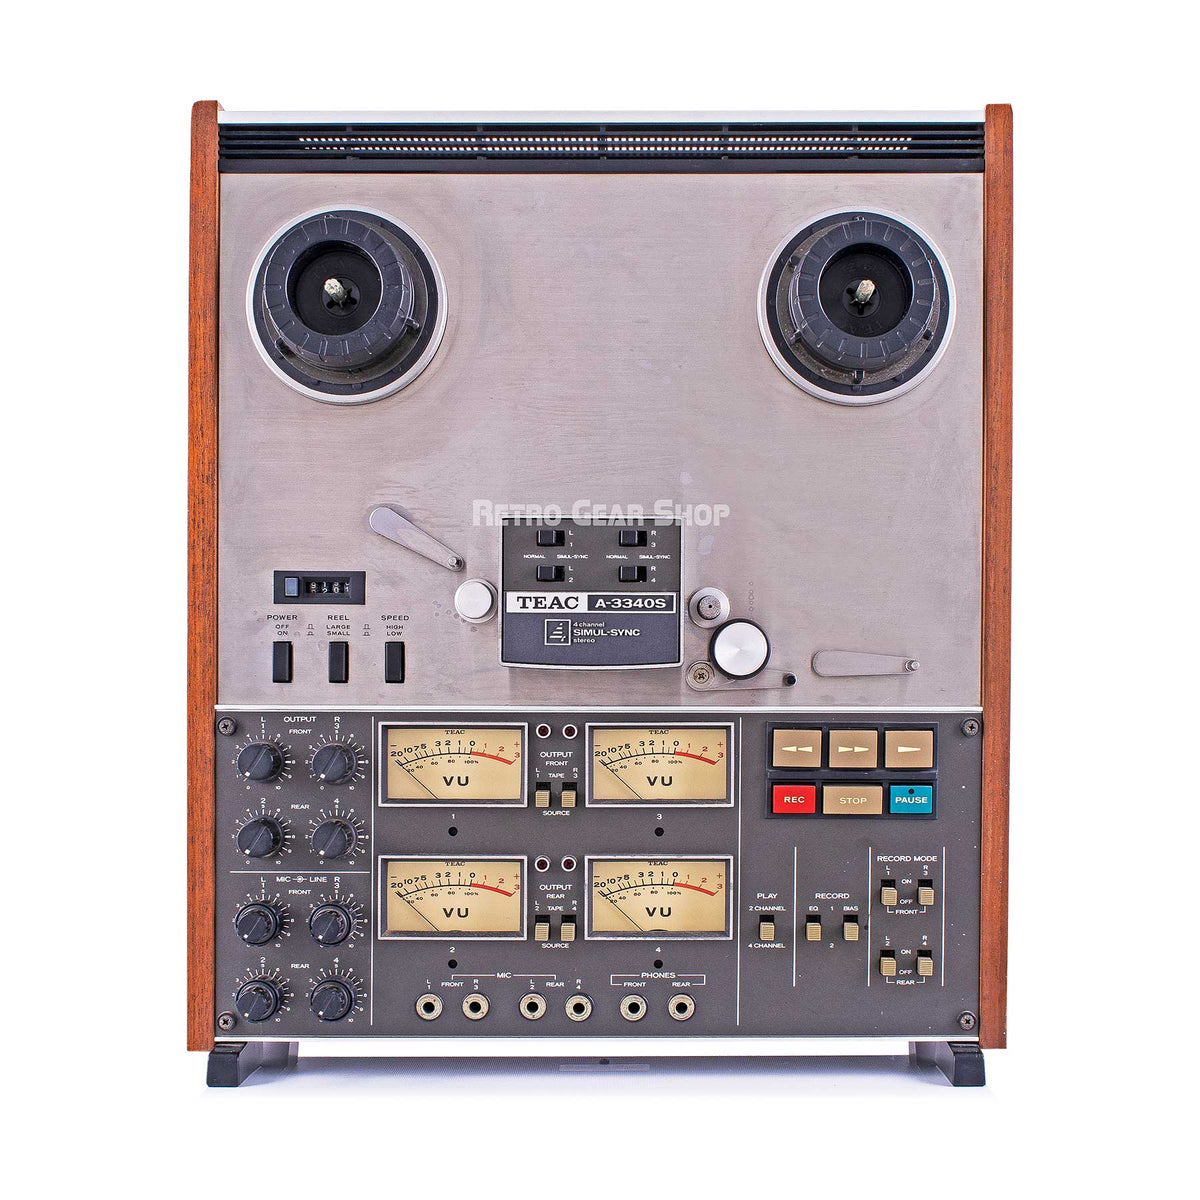 TEAC 4010 SL 1/4” reel to reel tape recorder for Sale in Portland